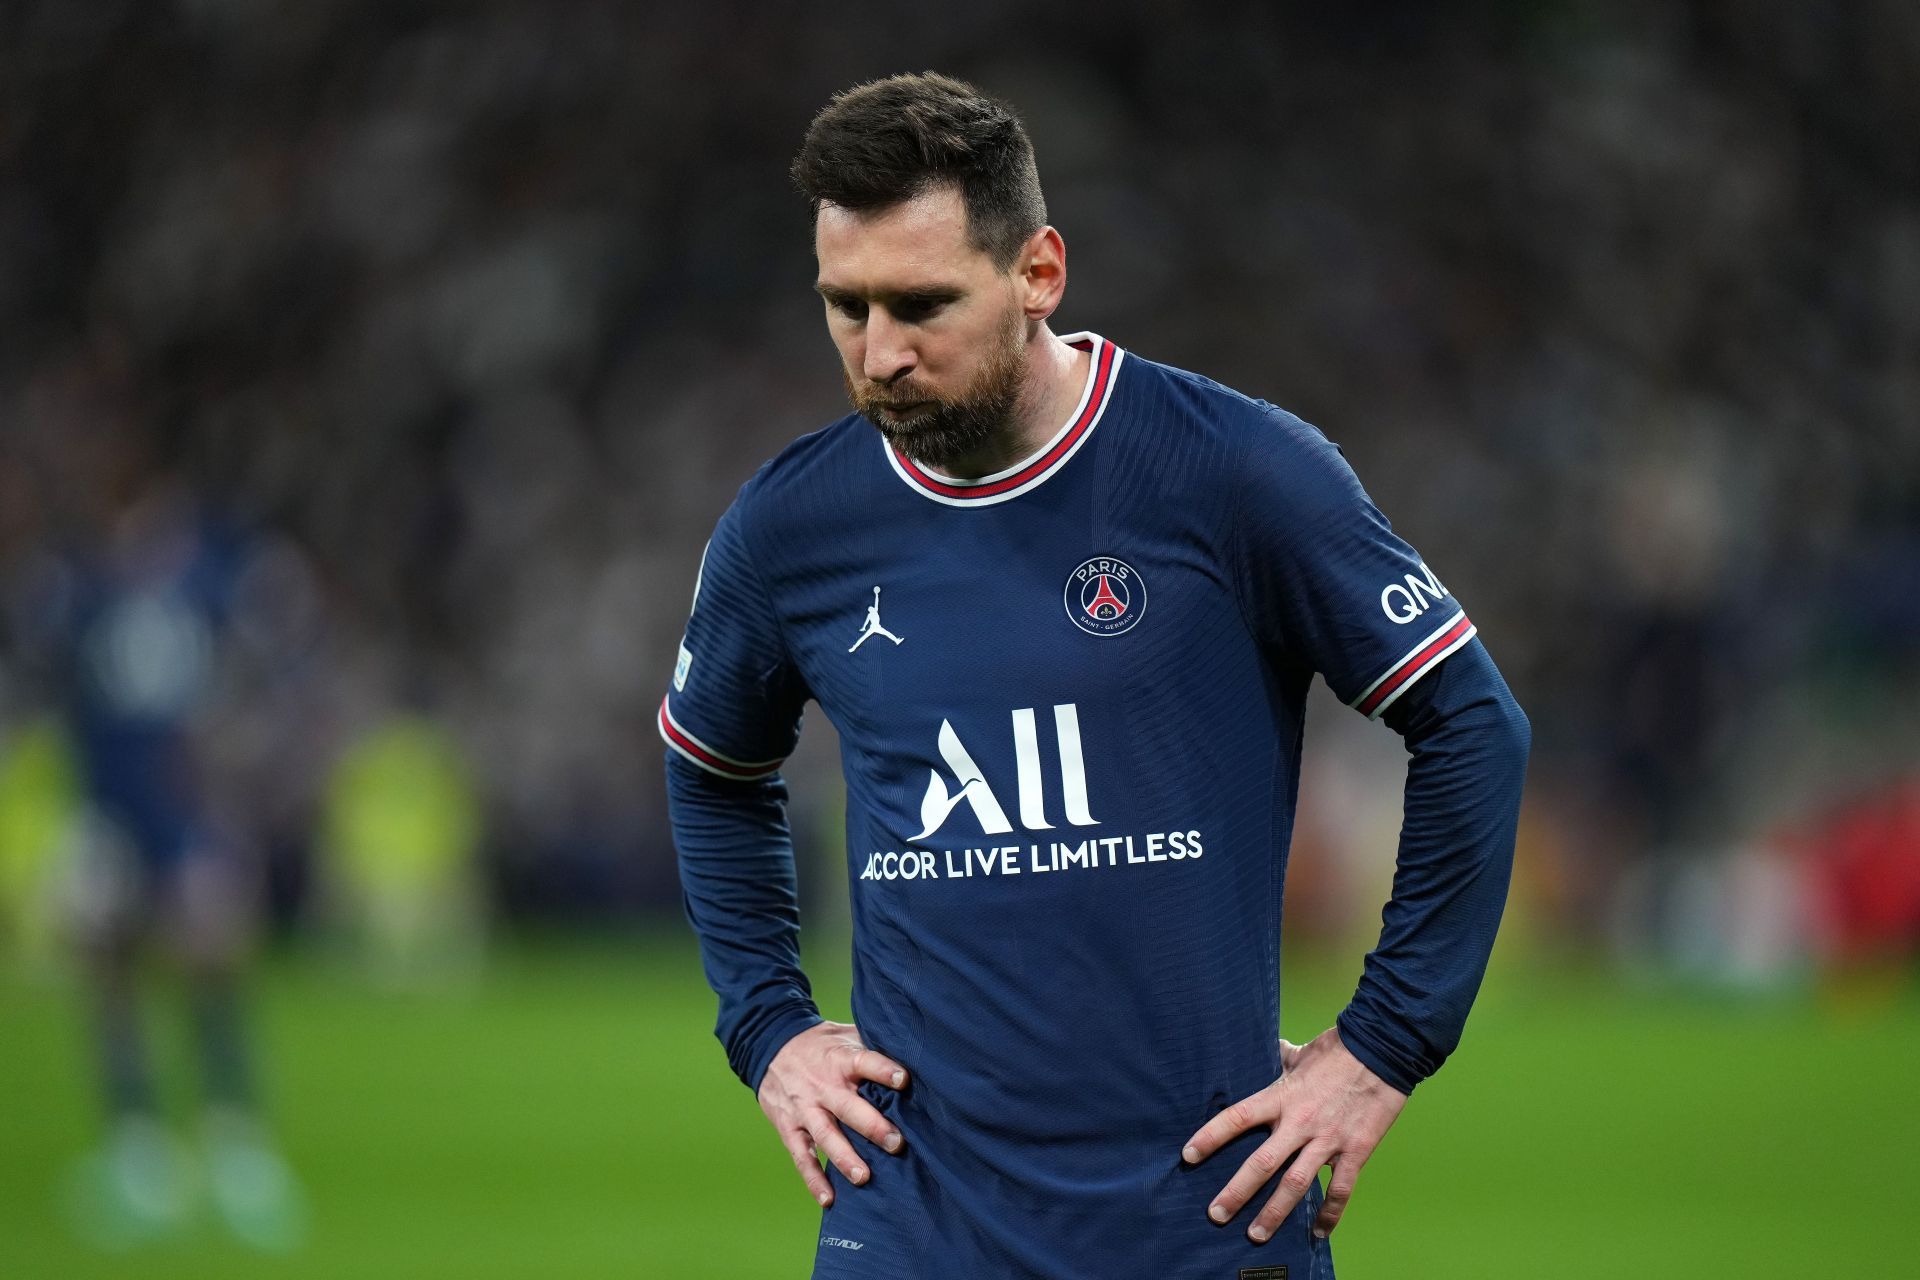 The Argentine has endured a difficult spell with PSG so far.